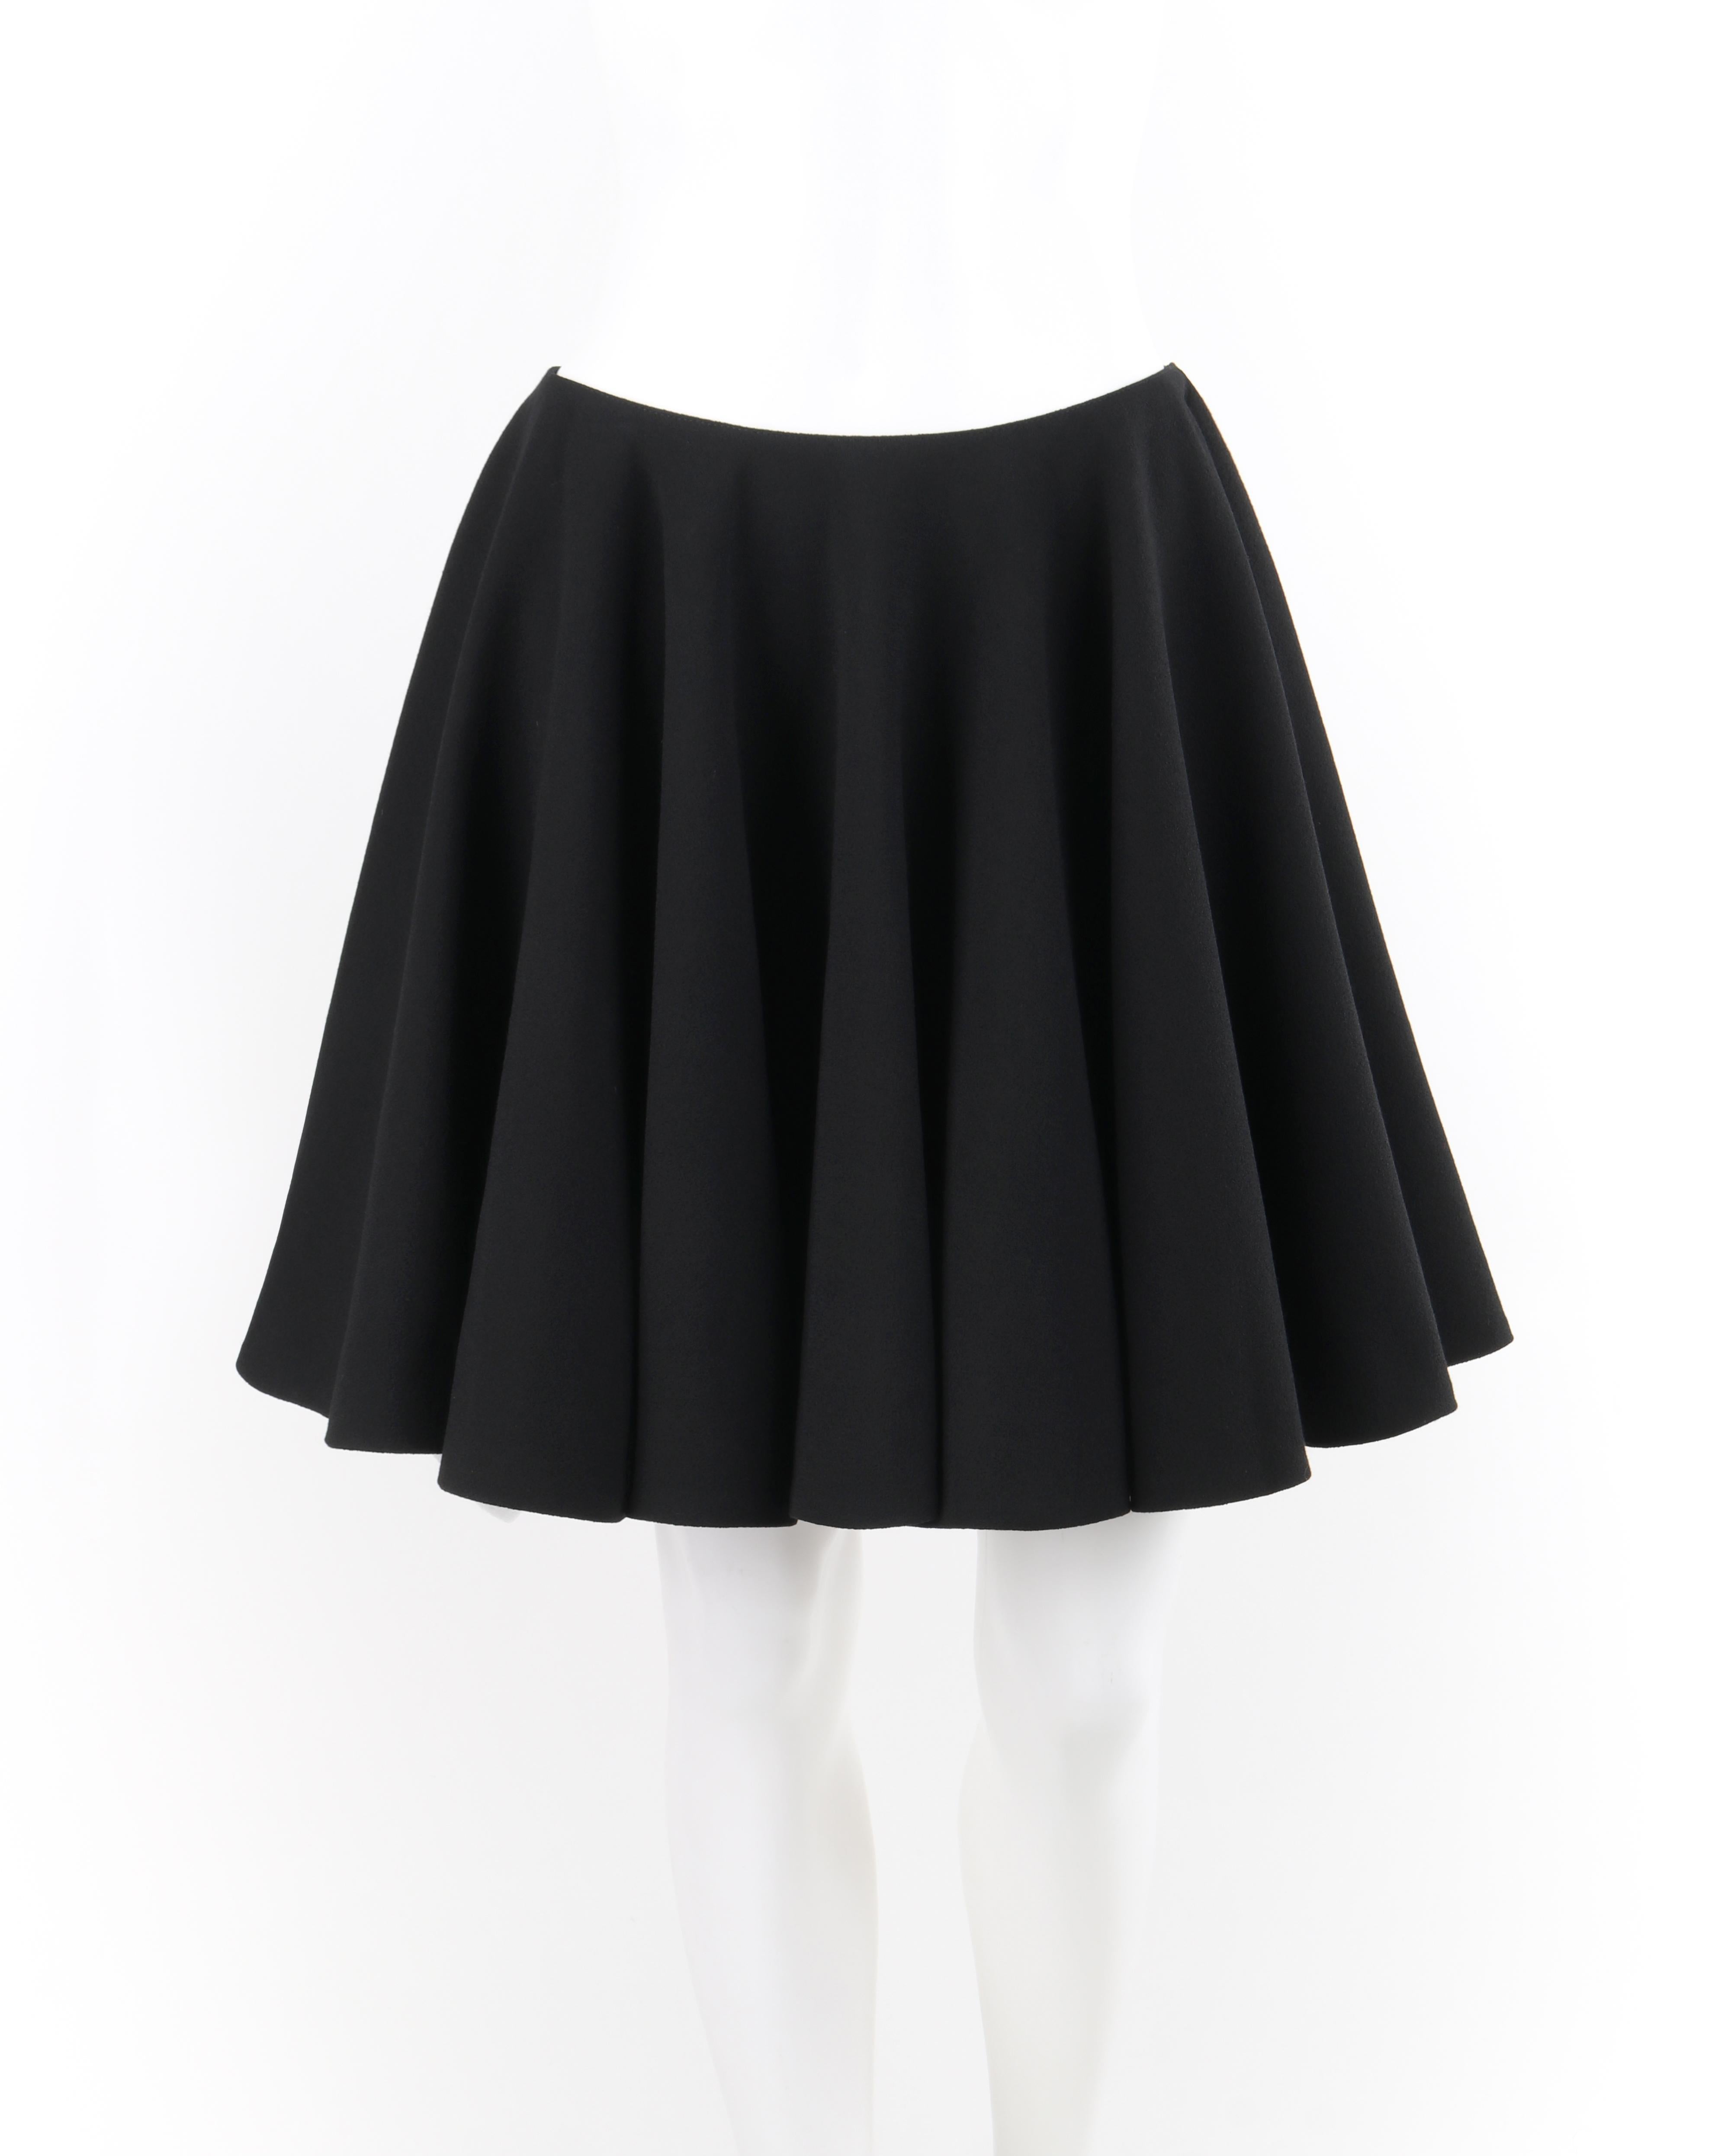 Brand / Manufacturer: Alexander McQueen
Collection: A/W 2012
Designer: Sarah Burton
Style: Above-the-knee skirt
Color(s): Shades of black
Lined: Yes
Marked Fabric Content: 